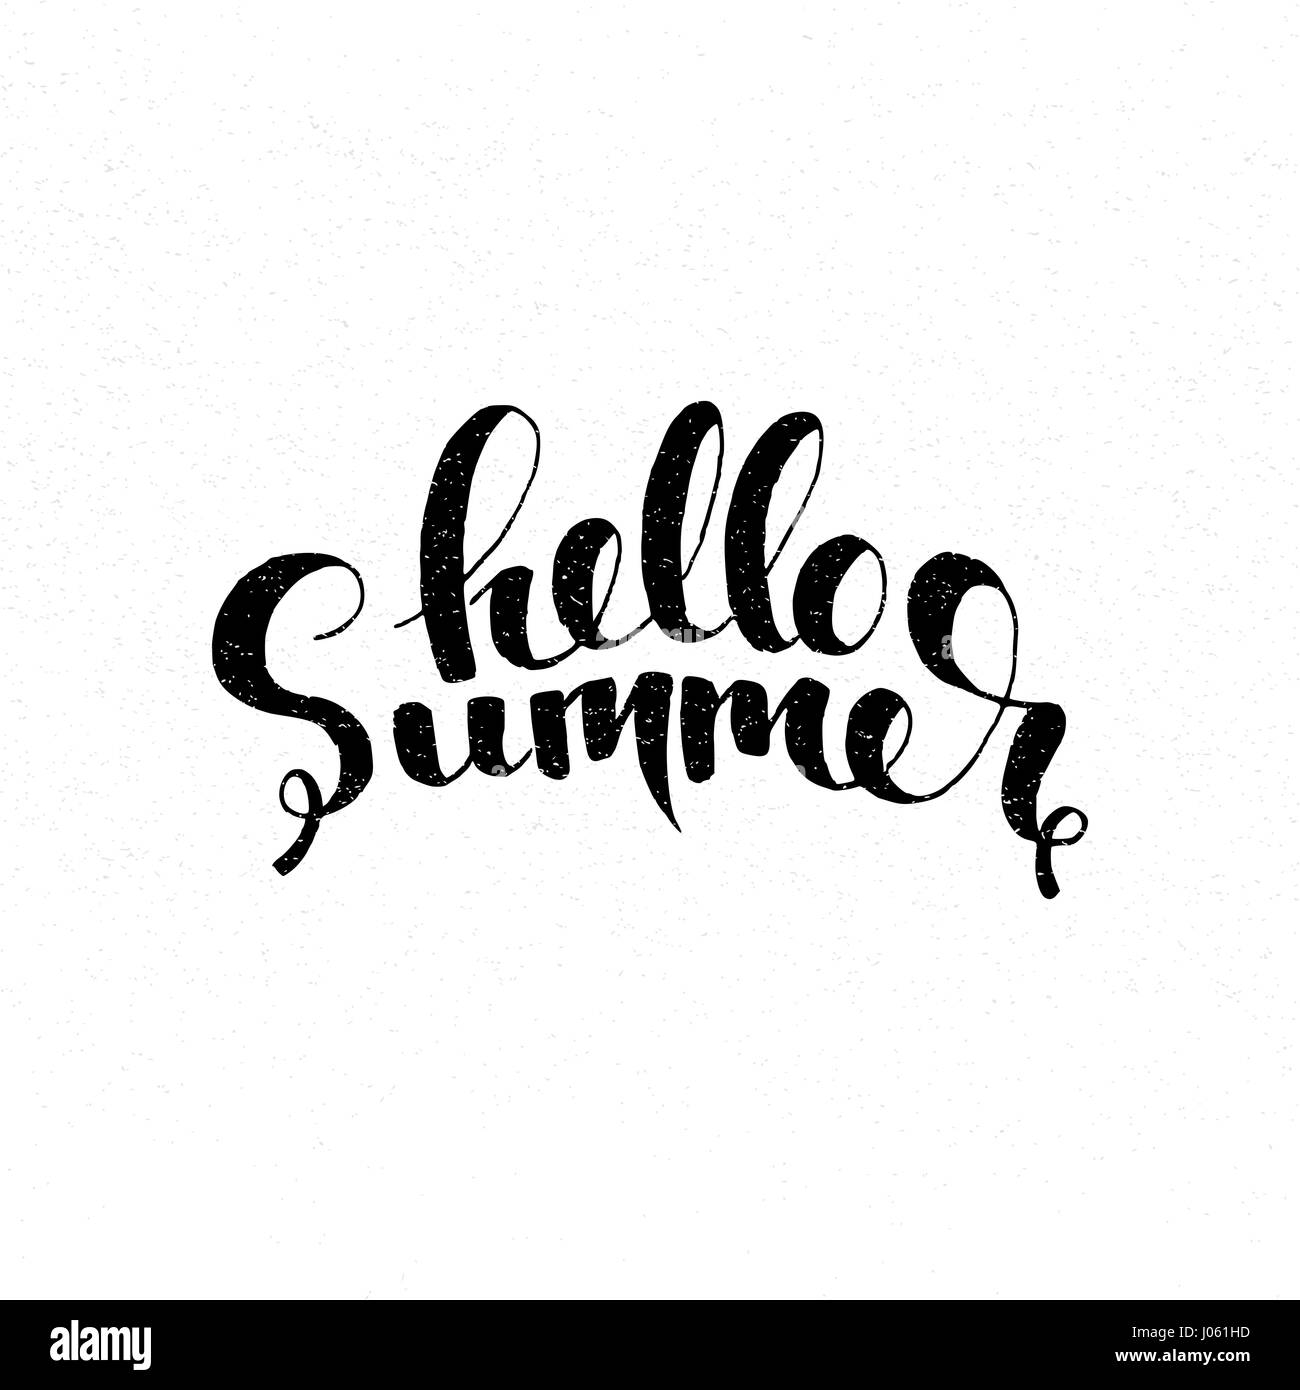 Hello Summer handwritten lettering. Modern vector hand drawn calligraphy with grunge overlay texture over white background Stock Vector